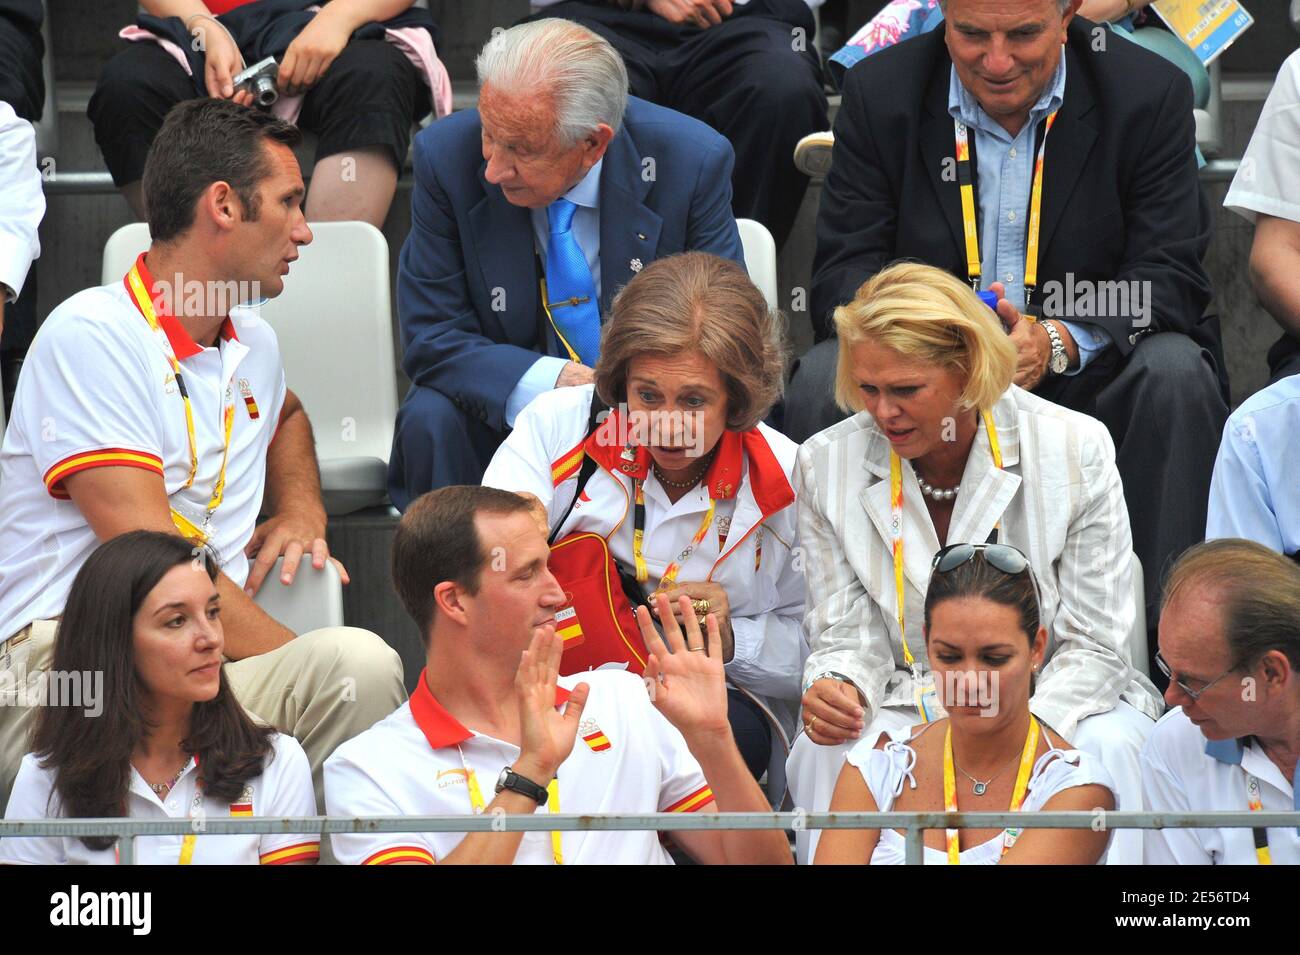 Spain's Queen Sofia, Princess Cristina of Spain with her husband Inaki Urdangarin, Bruno Gomez Acebo of Borbon and his girlfriend Barbara Cano De La Plaza, Juan Antonio Samaranch and Grand Duke Henri of Luxembourg attend the Men's Final tennis match, Spain's Rafael Nadal vs Chile's Fernando Gonzalez at the Olympic Green Tennis Center on Day 9 of the Beijing 2008 on August 17, 2008. Photo by Jean-Michel Psaila/Cameleon/ABACAPRESS.COM Stock Photo